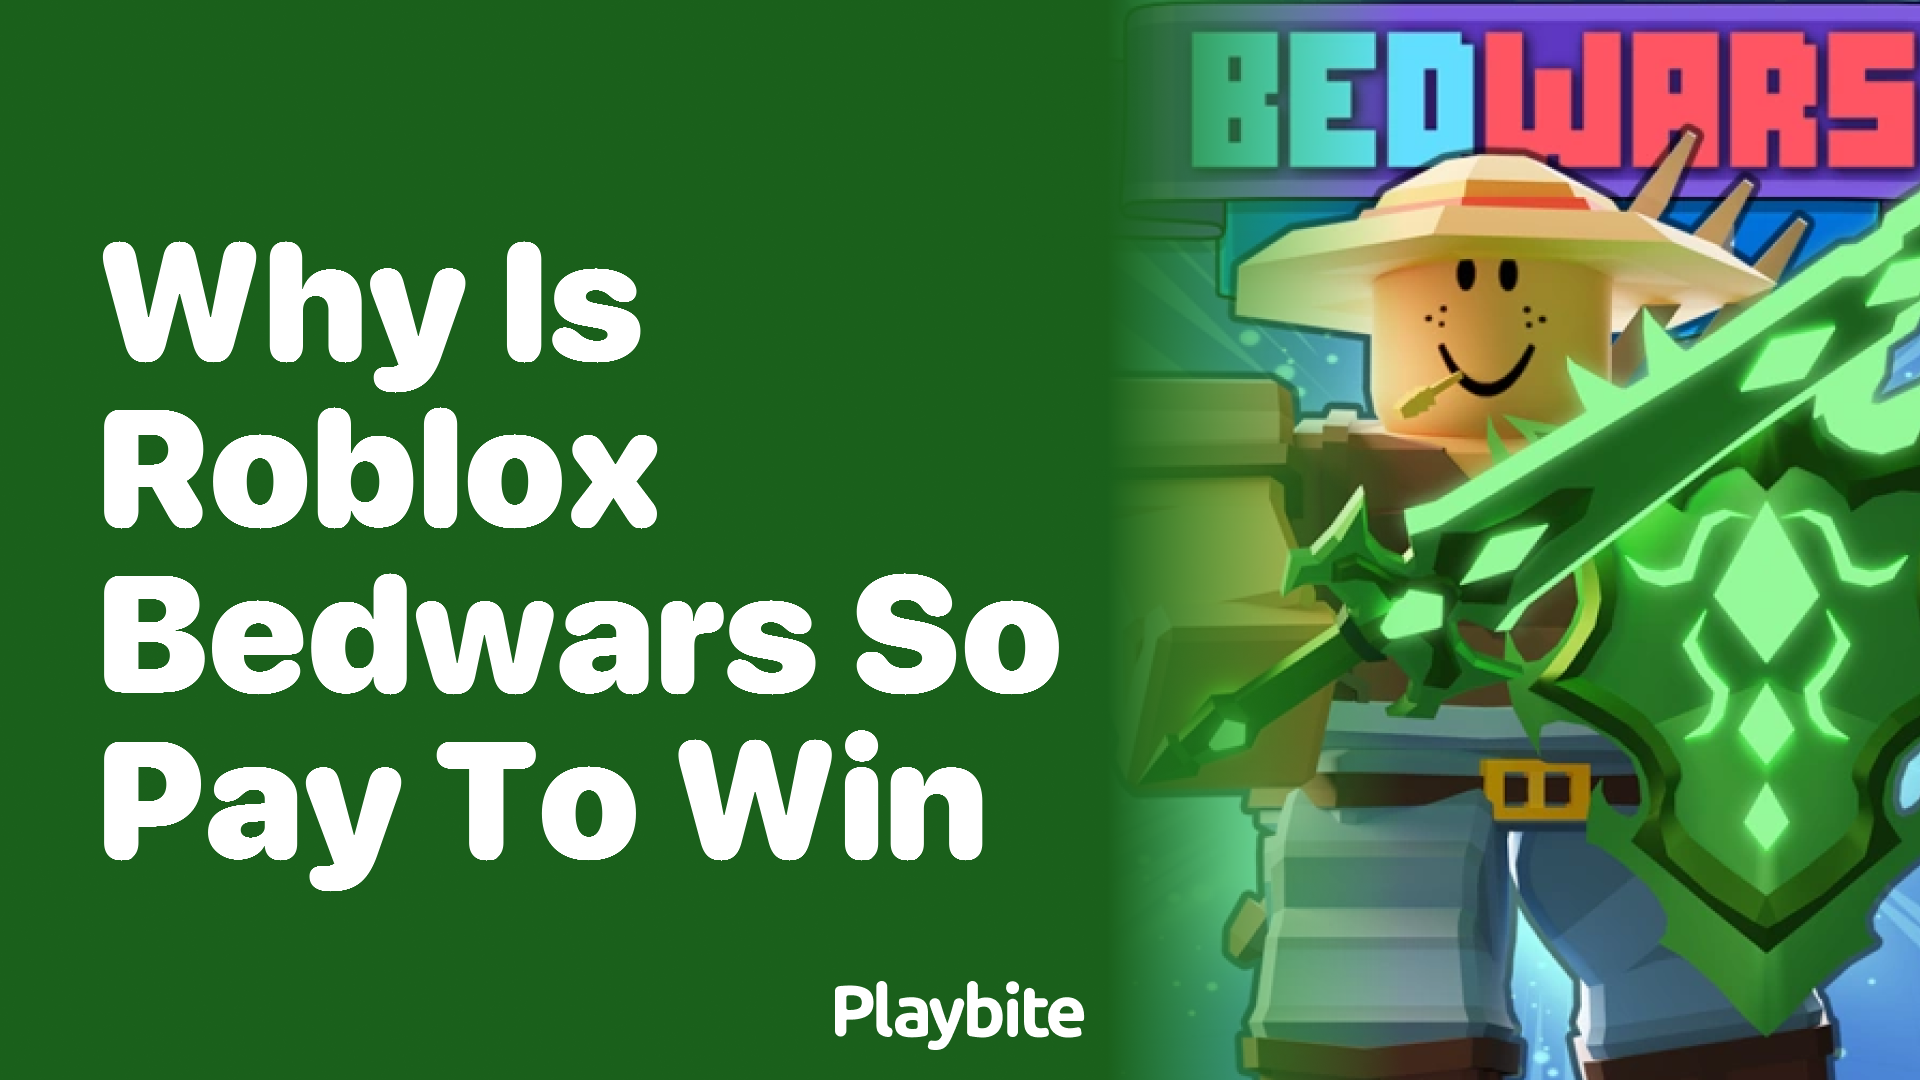 Why is Roblox BedWars Considered Pay to Win?